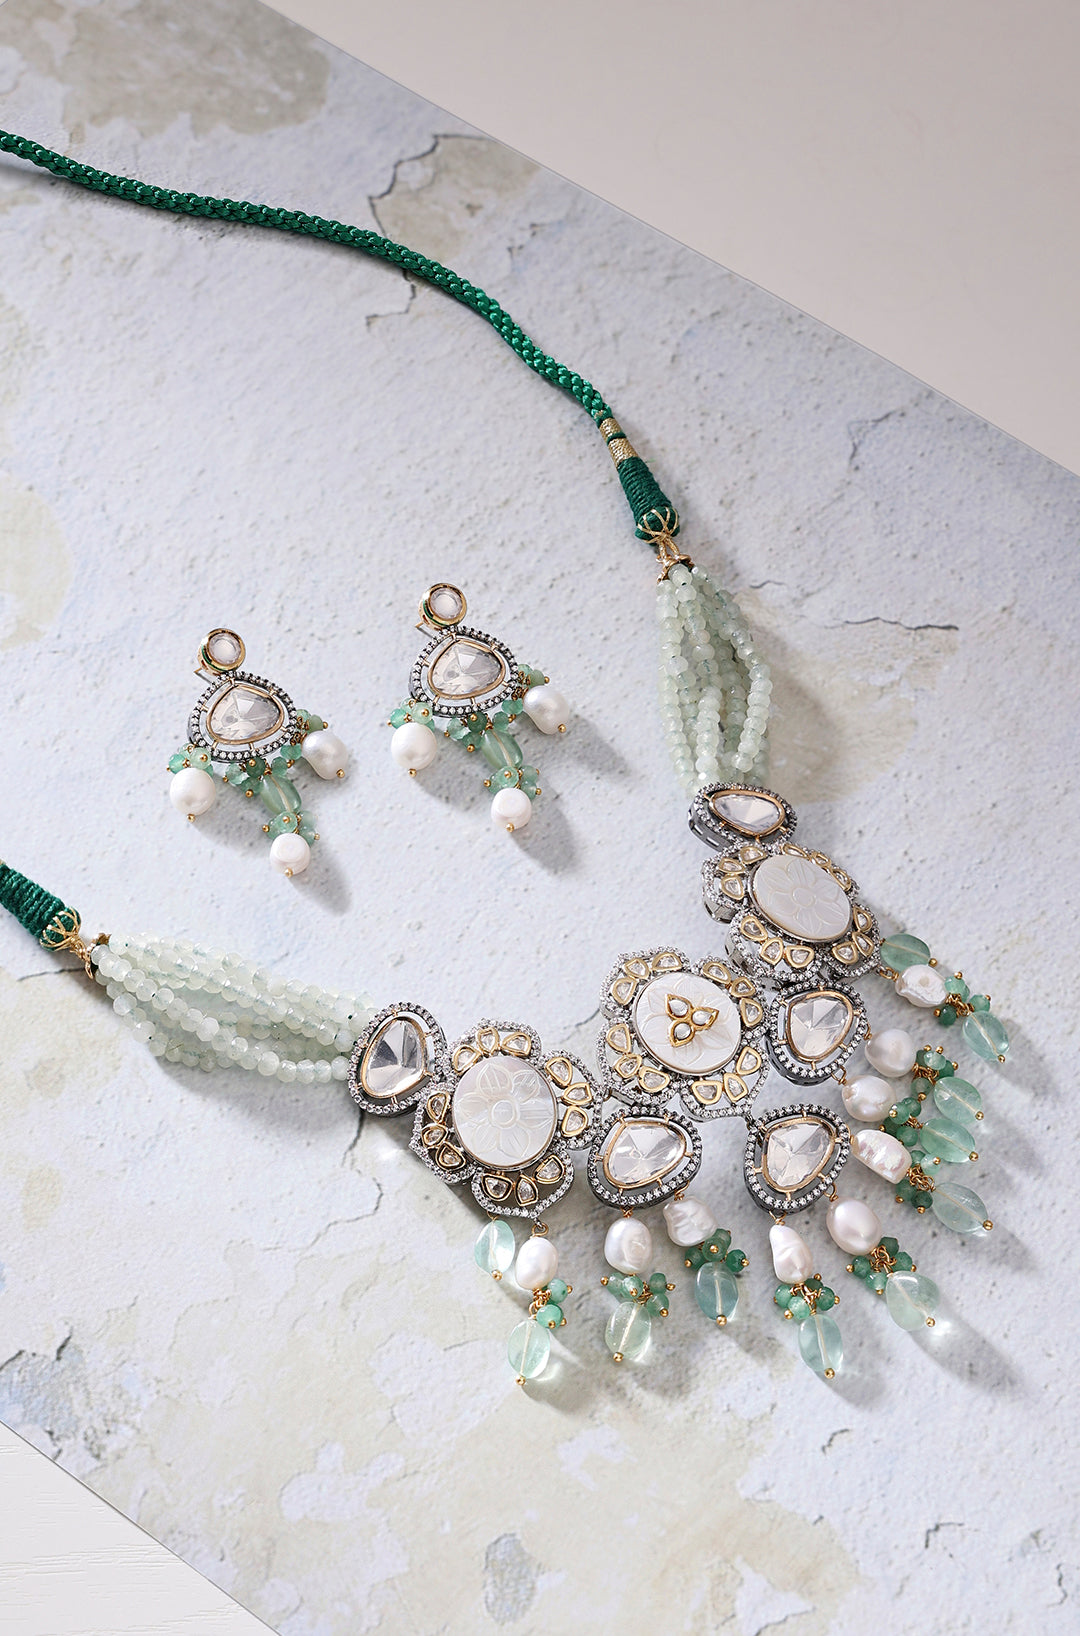 Load image into Gallery viewer, Antique White And Green Necklace Set - Joules by Radhika
